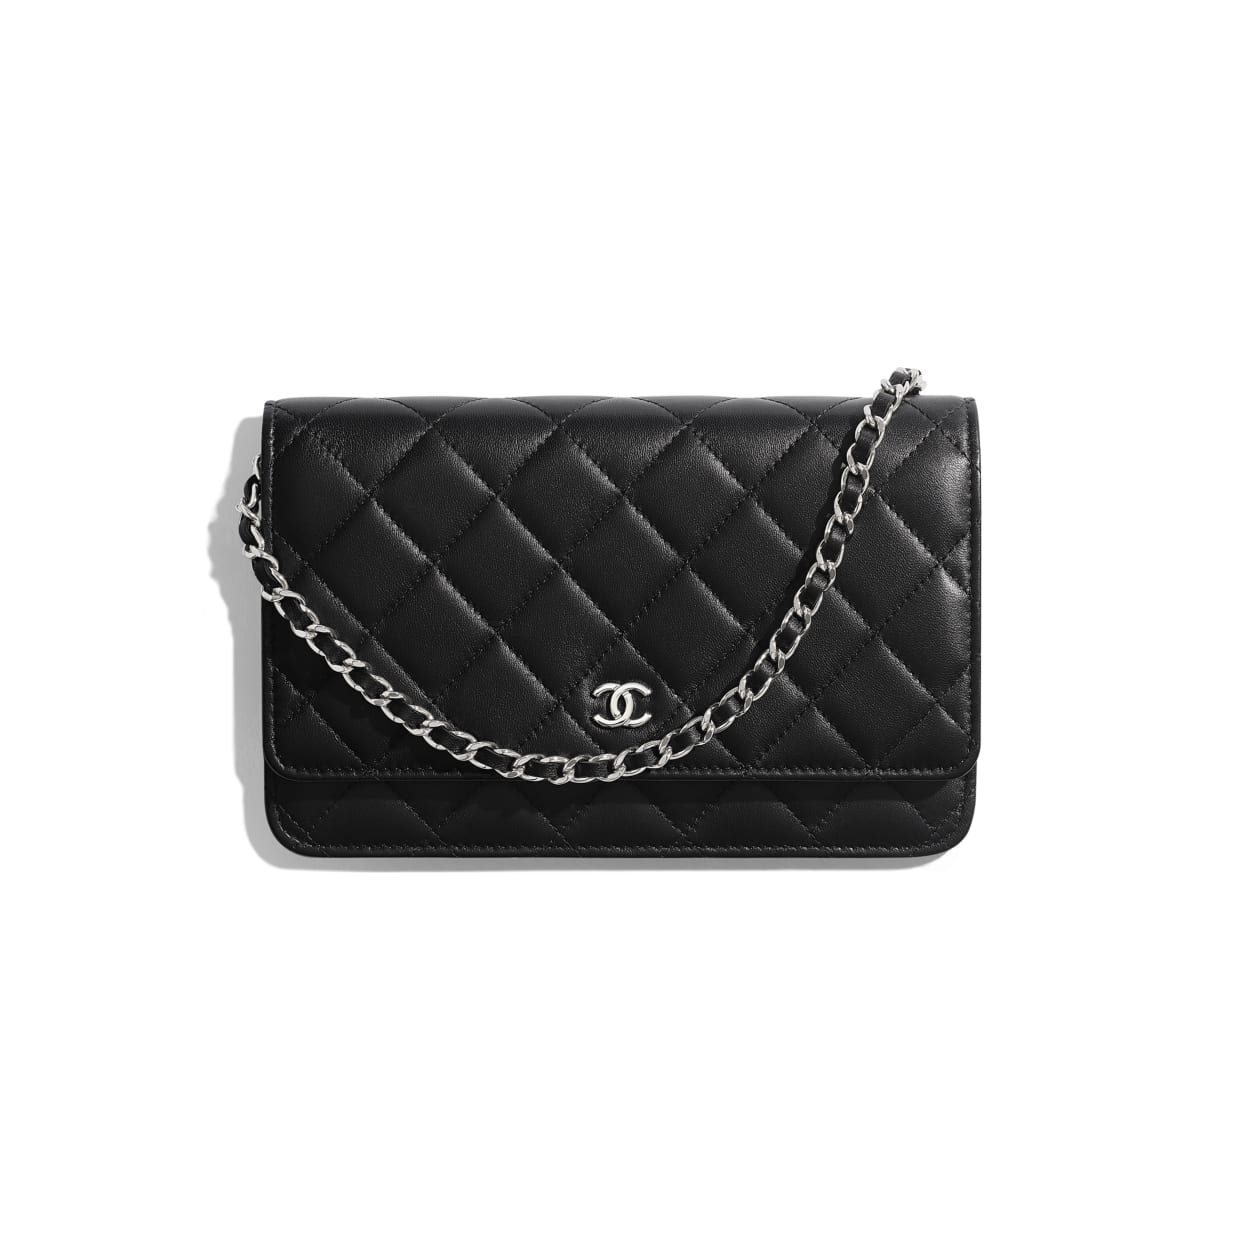 The price of this Chanel handbag just went up iconic bags now 5 to 17 per  cent more expensive